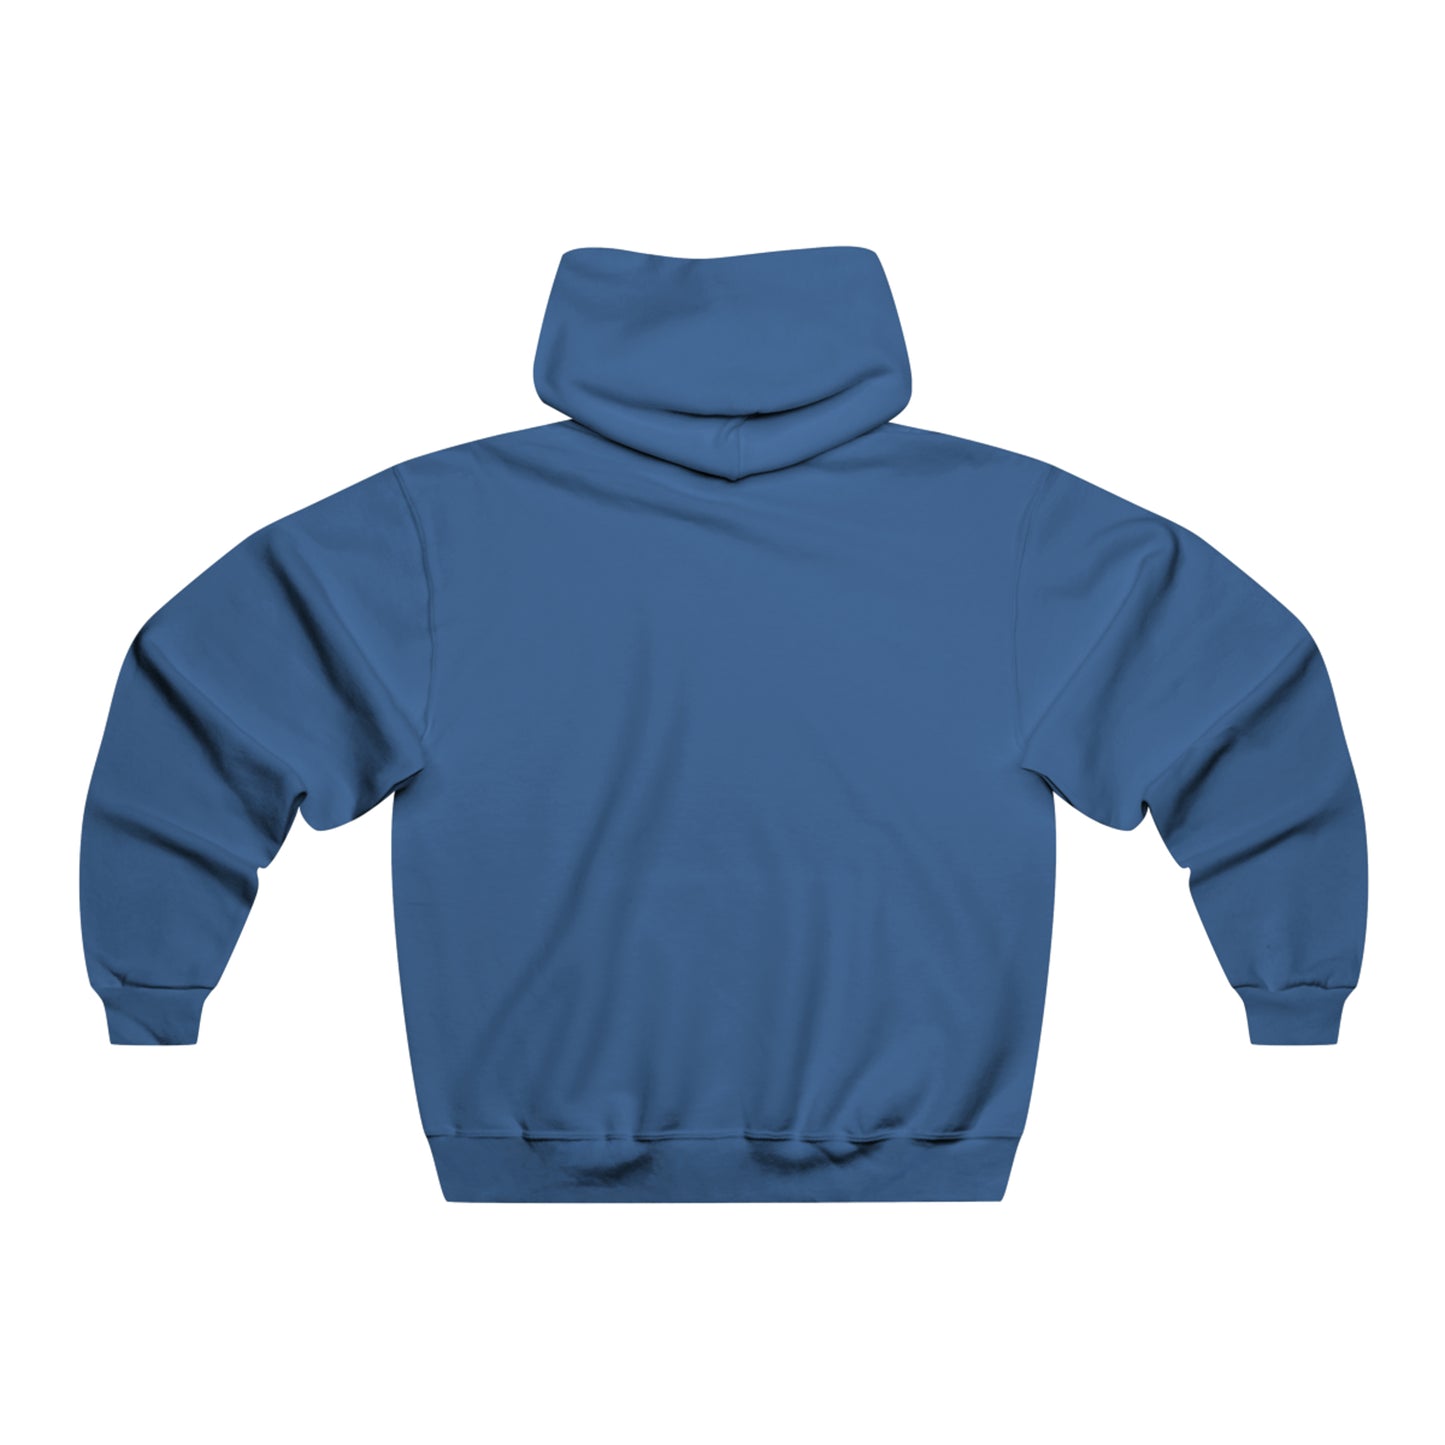 You ever played rugby hoodie